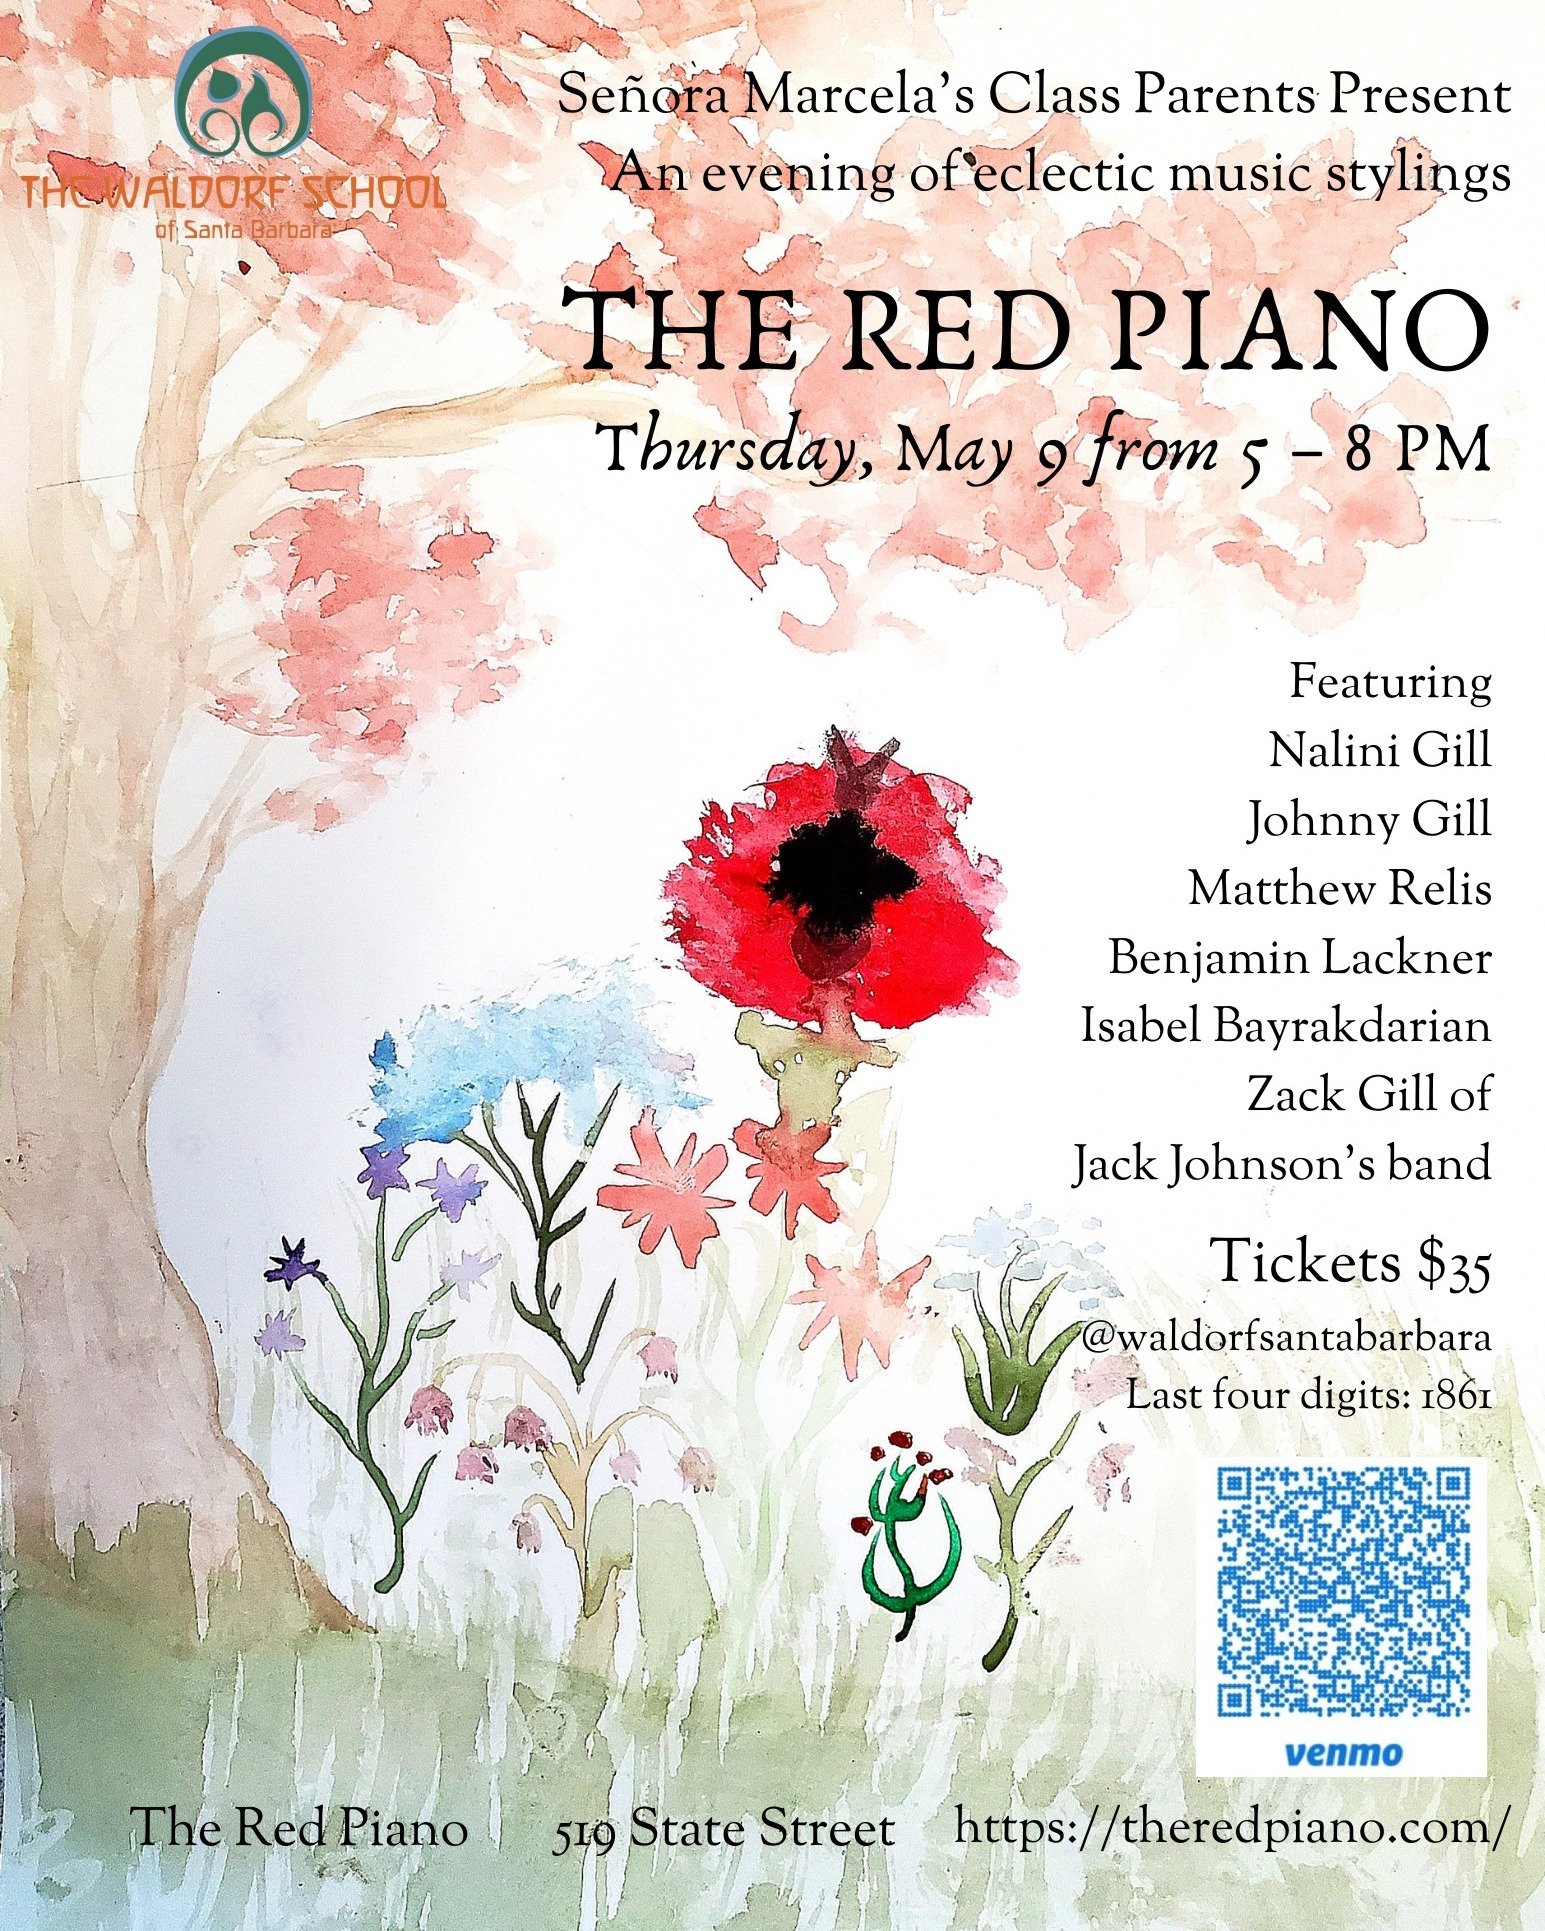 We're so stoked to be able to support local education while enjoying amazing live music! Next Thursday, May 9 from 5-8pm, join us at The Red Piano for an epic evening of eclectic music stylings for the Waldorf School of Santa Barbara - new page. They